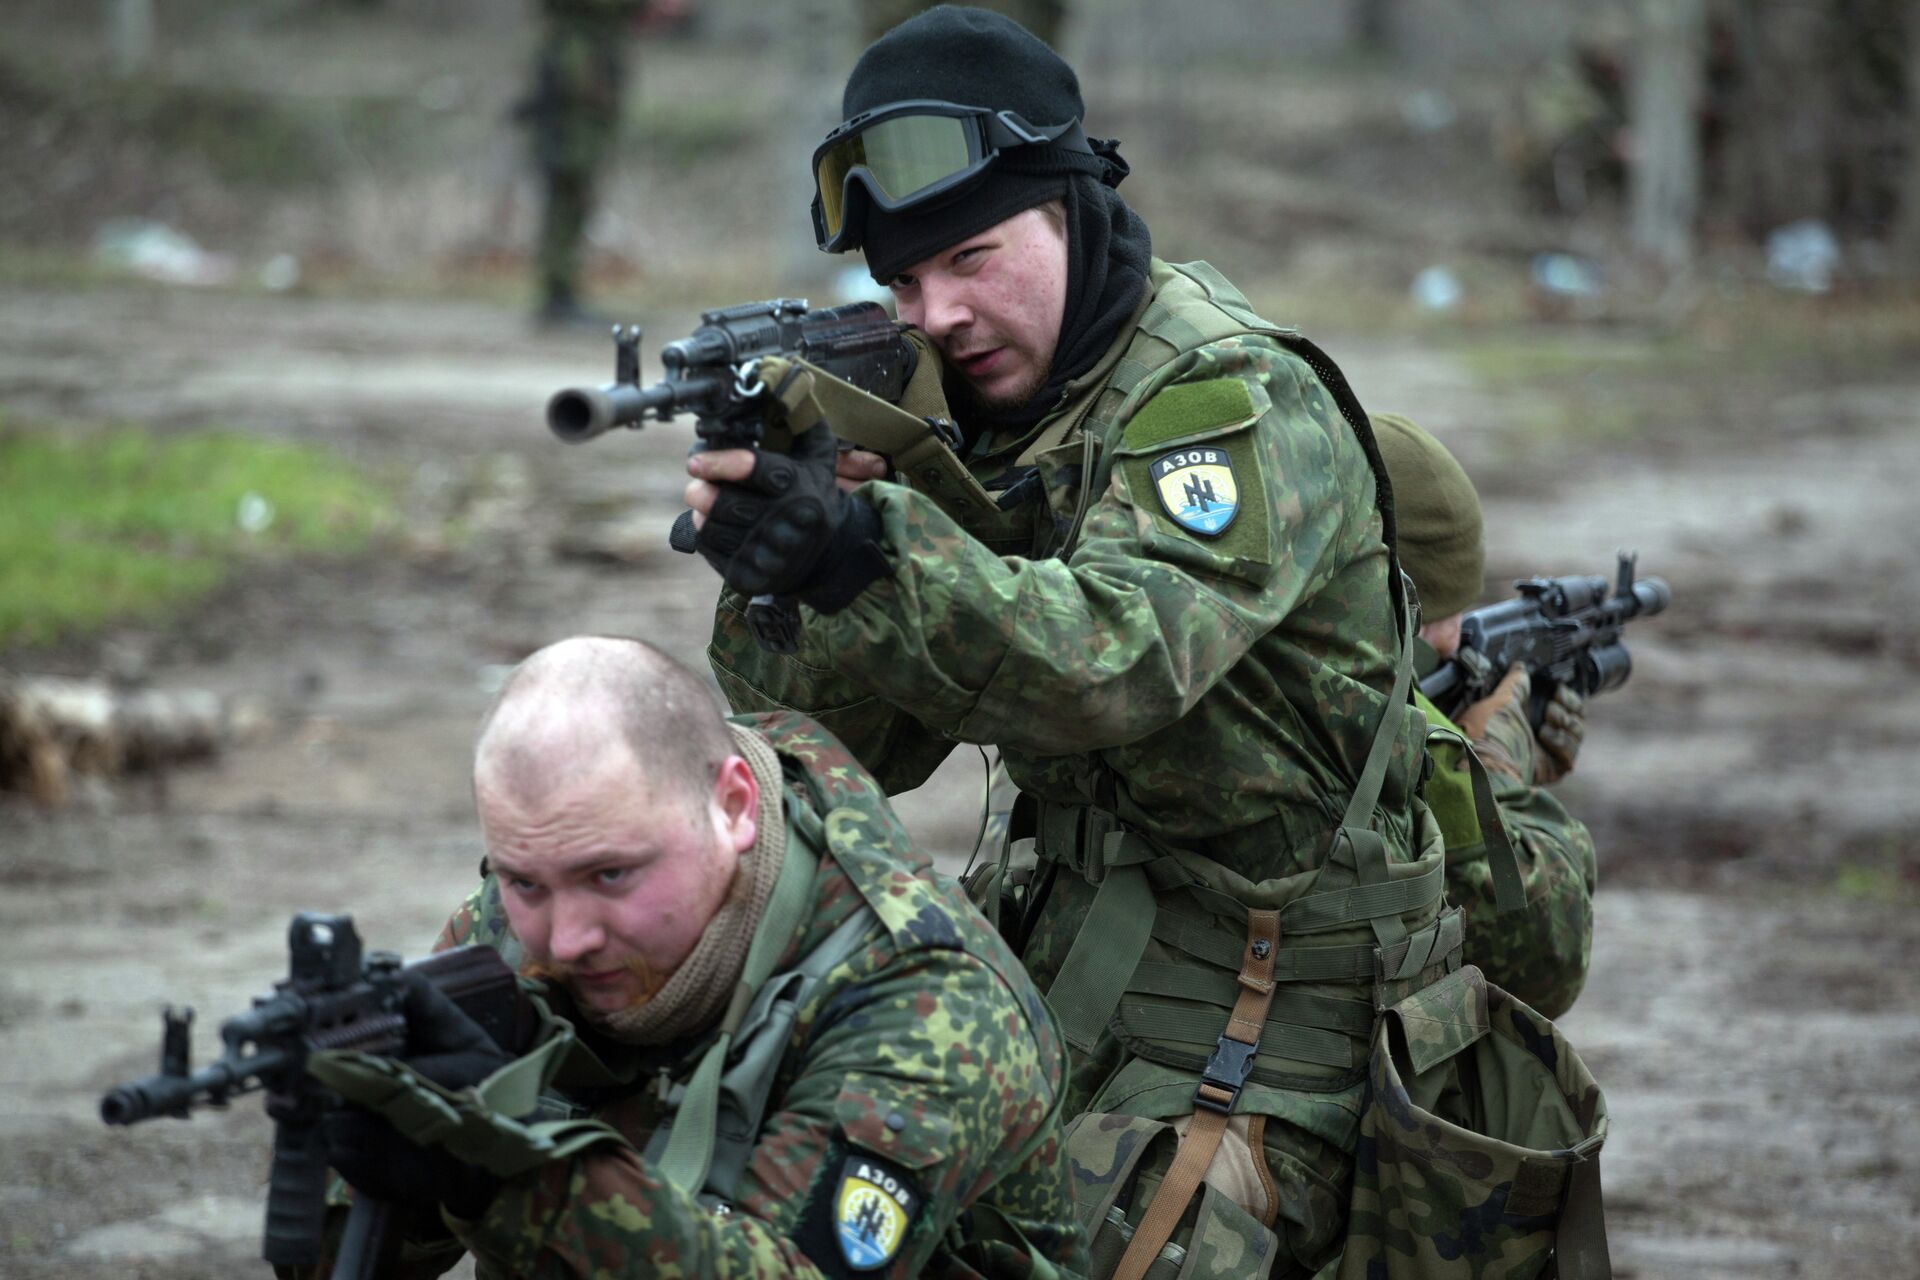 Fighters of the Azov paramilitary battalion, a pro-Ukrainian volunteer armed group, take part in combat drills near the southern Ukrainian city of Mariupol on February 6, 2015 - Sputnik International, 1920, 01.03.2022